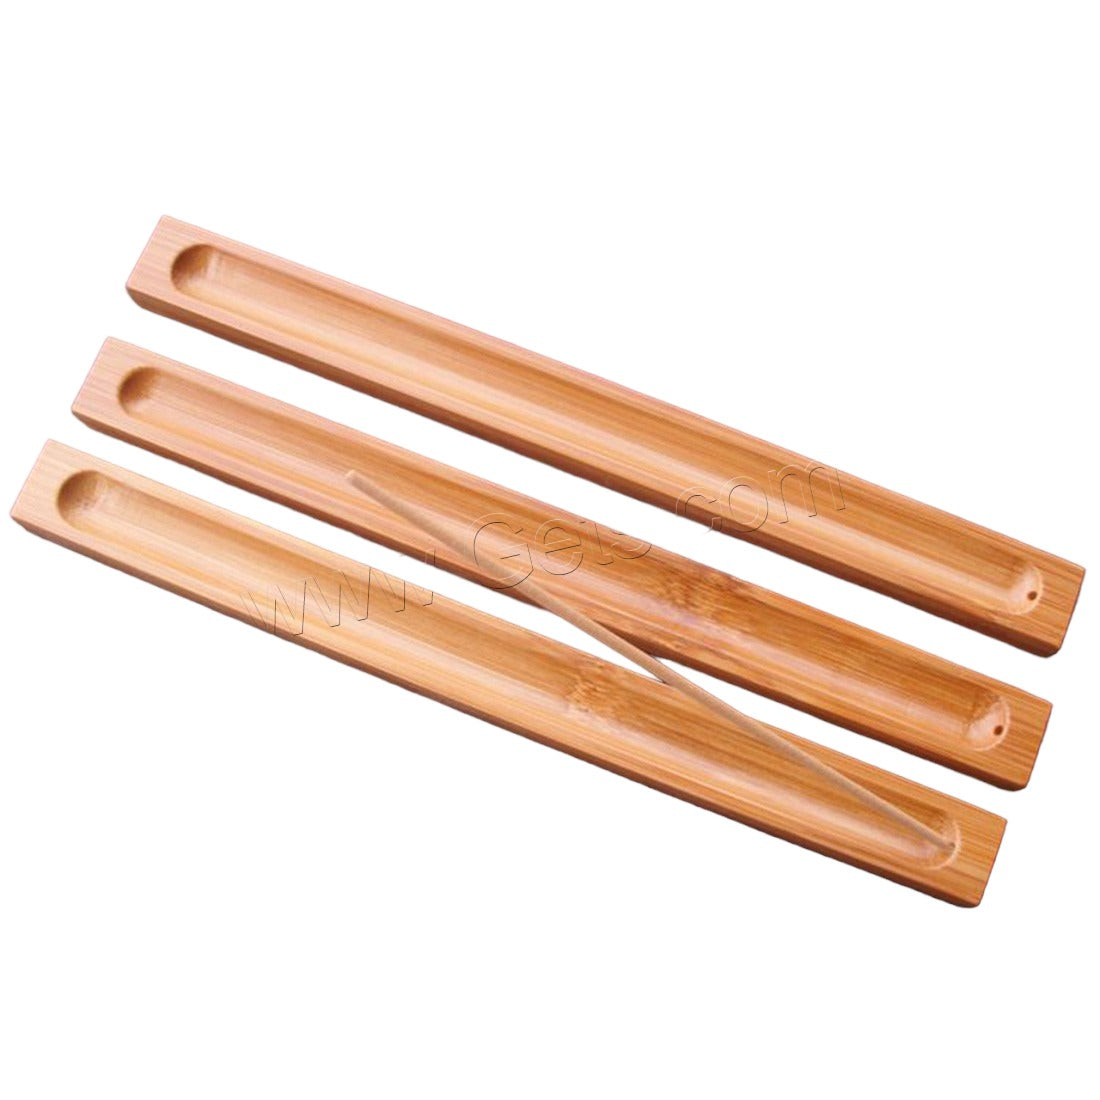 Bamboo Incense Holder - NEW523